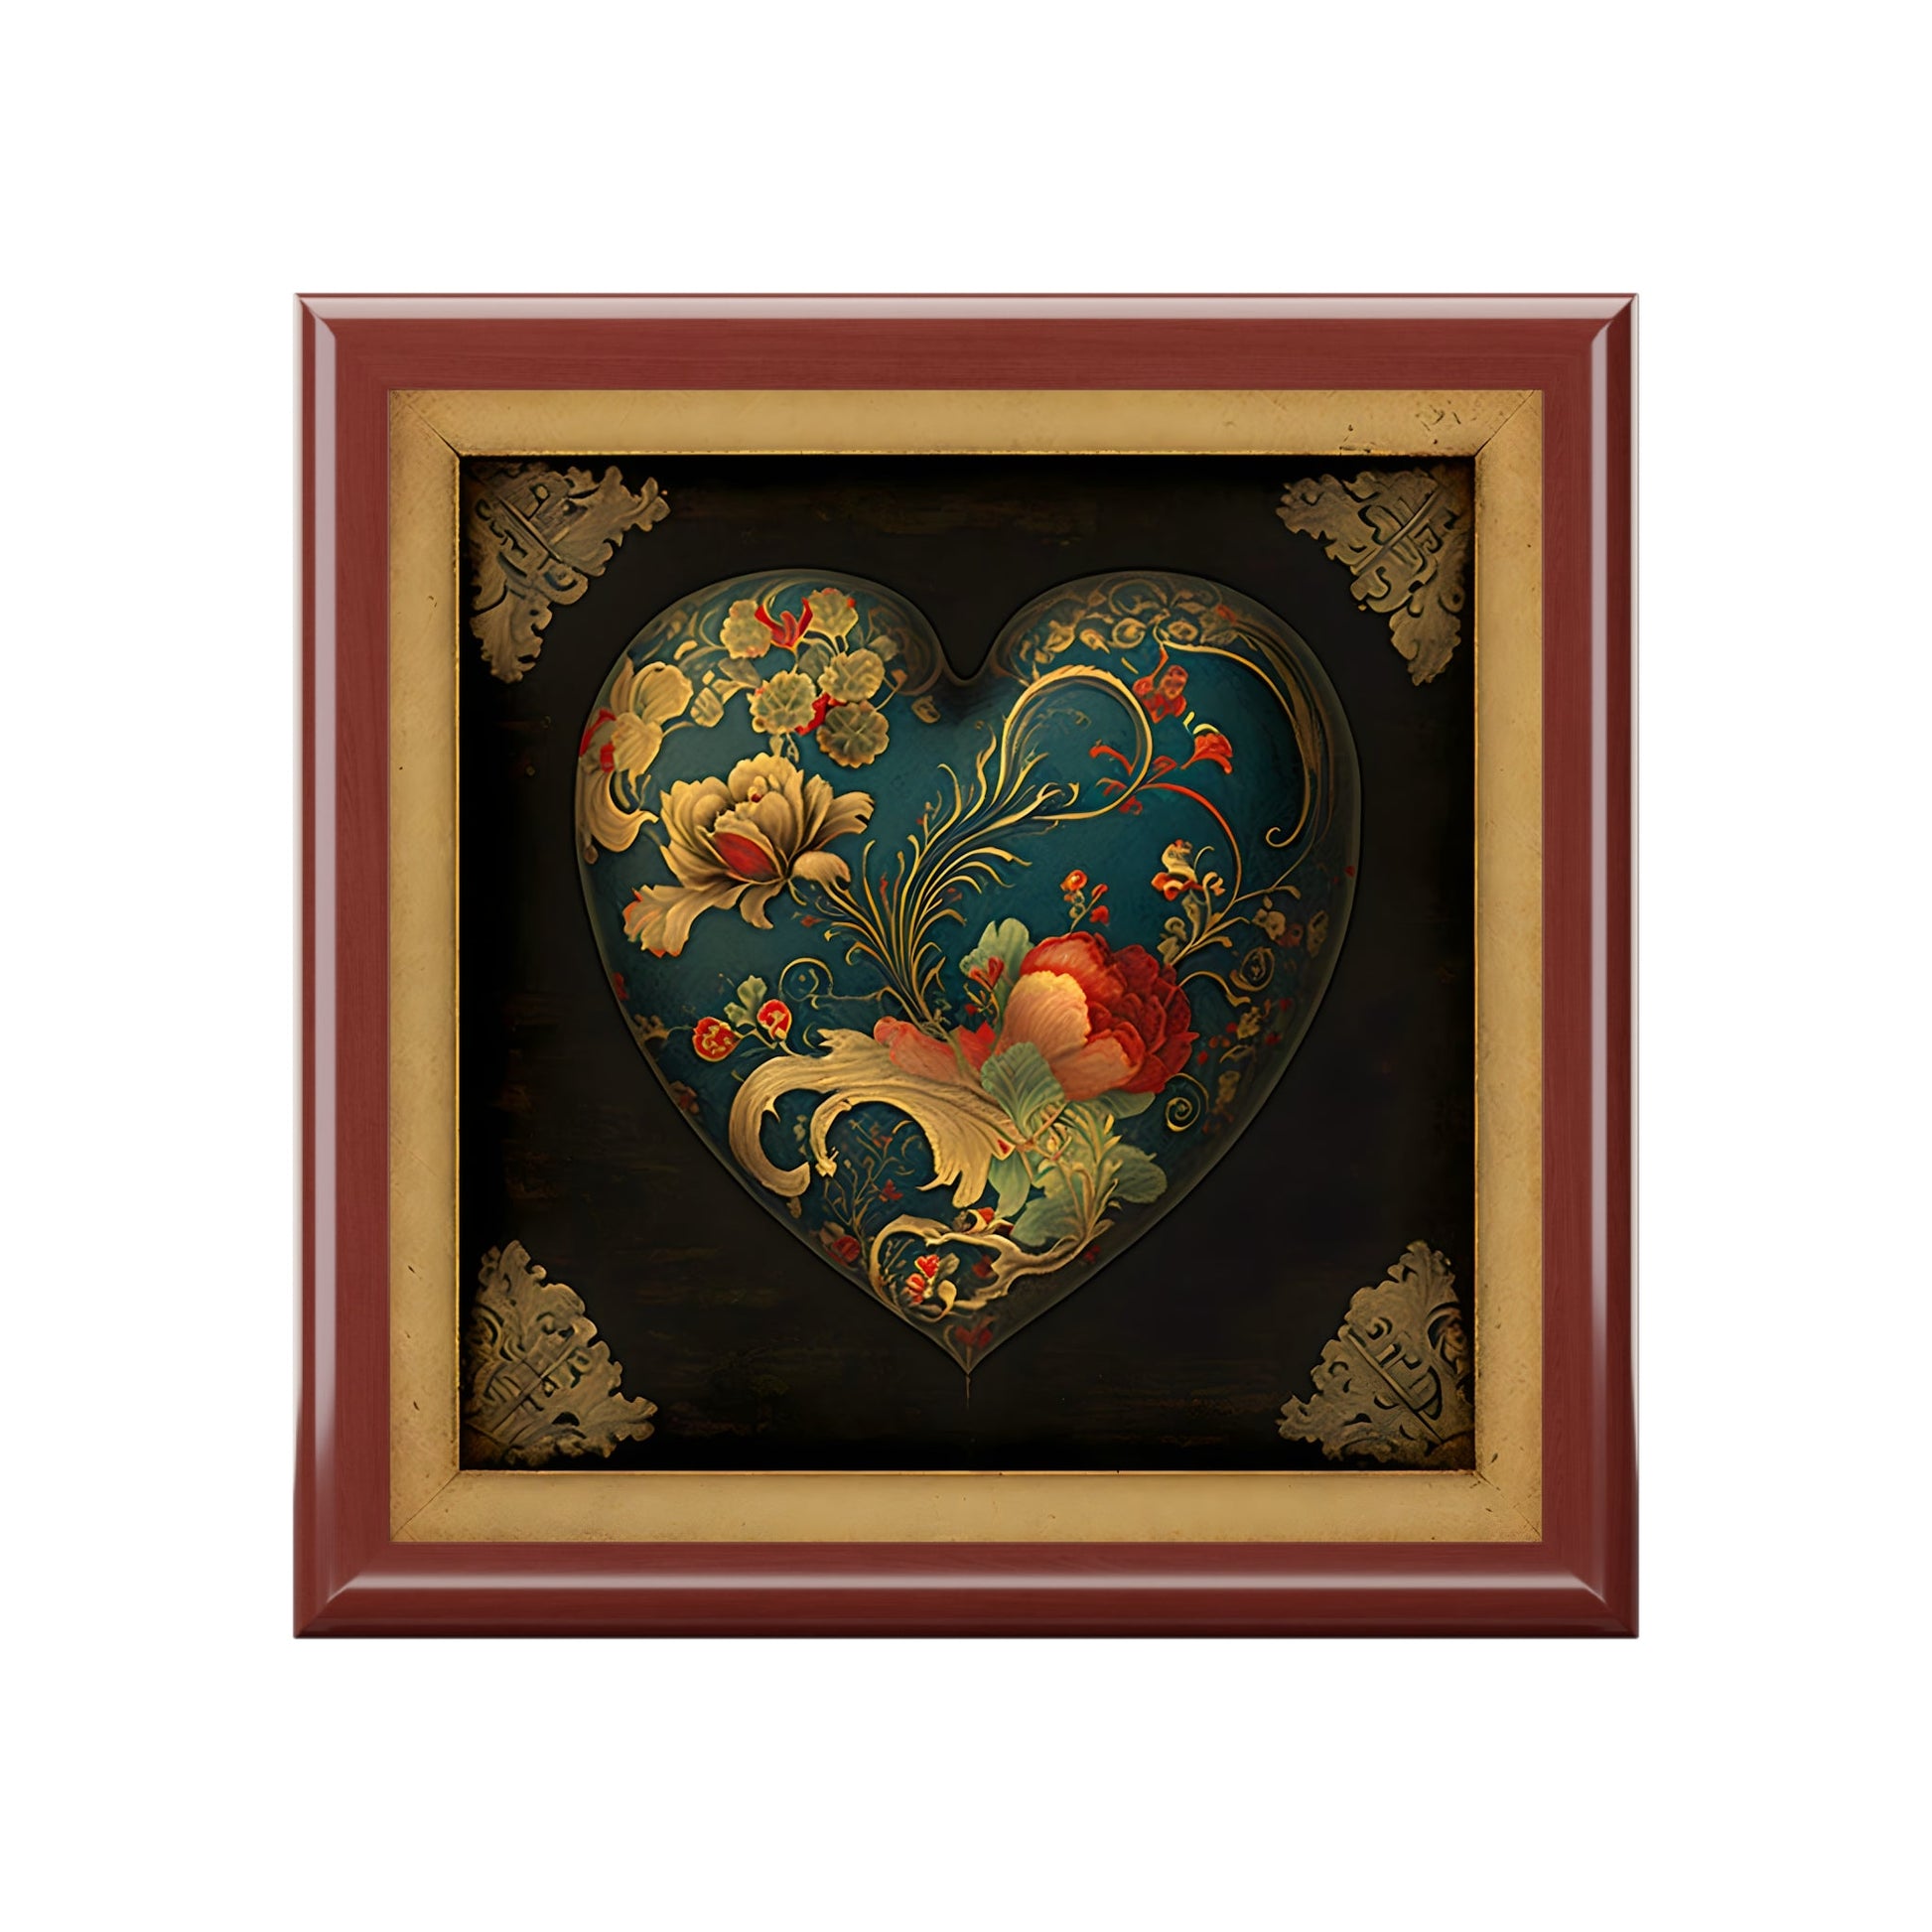 Vintage Chinese Folk Art Heart Gift and Jewelry Box